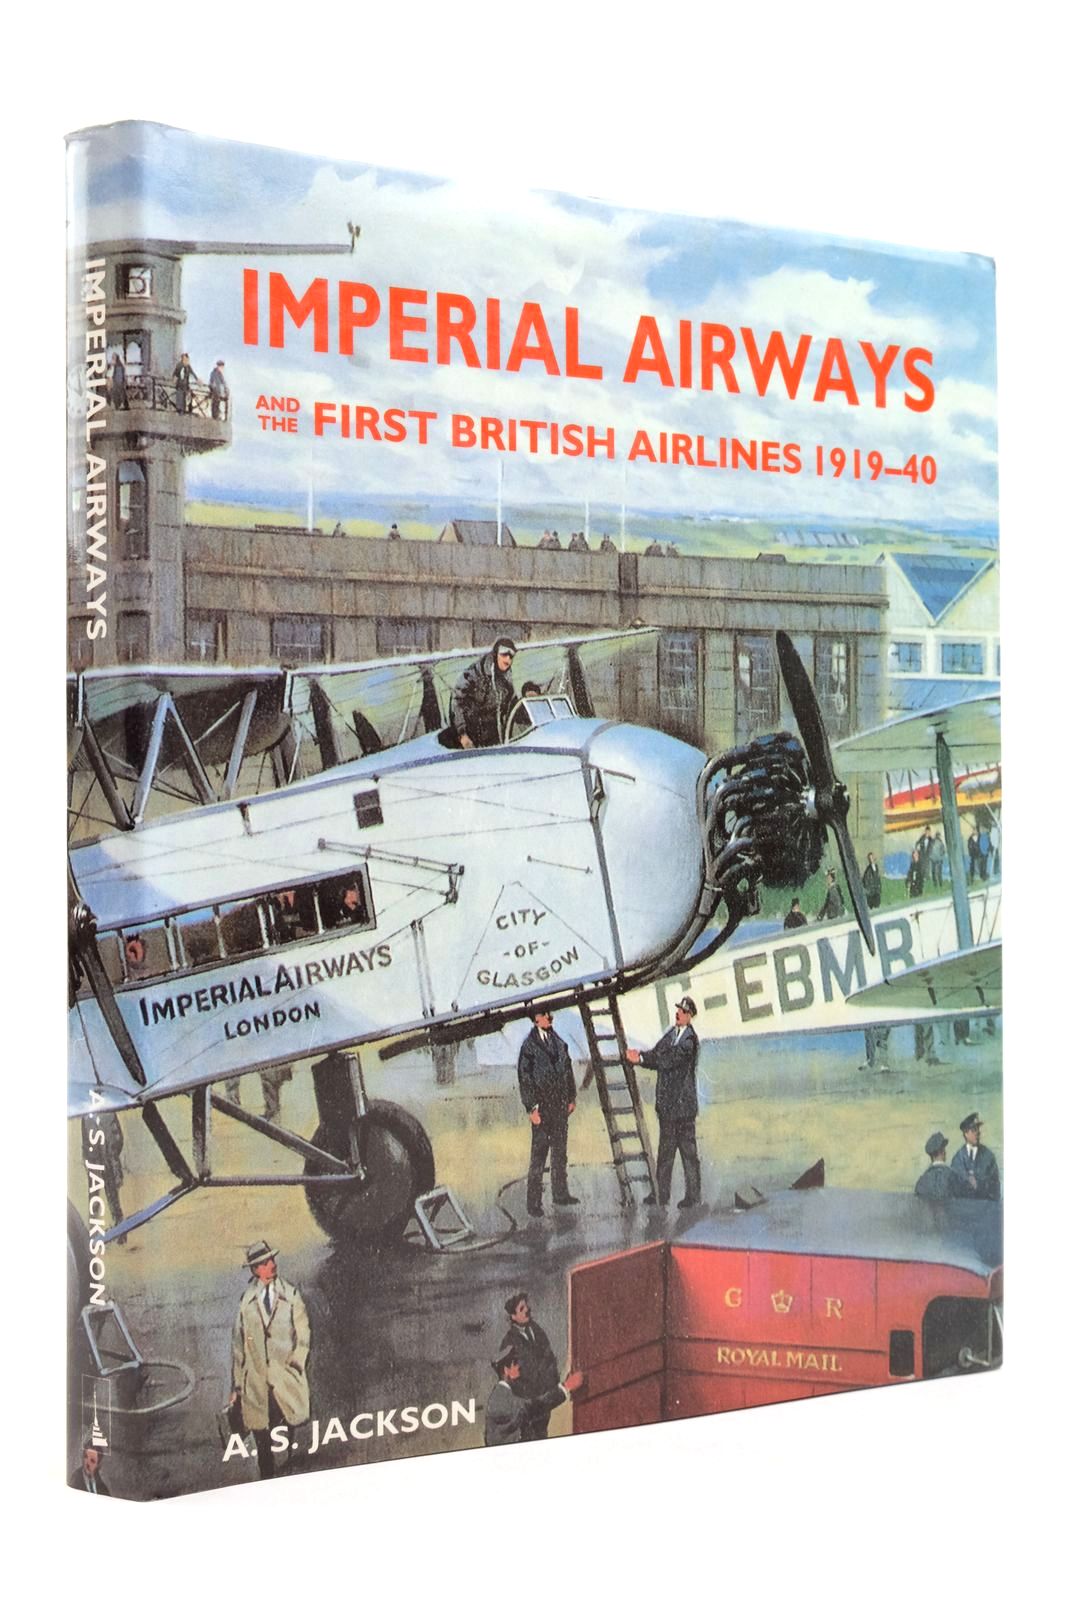 Photo of IMPERIAL AIRWAYS AND THE FIRST BRITISH AIRLINES 1919-40 written by Jackson, A.S. published by Terence Dalton Limited (STOCK CODE: 2138429)  for sale by Stella & Rose's Books